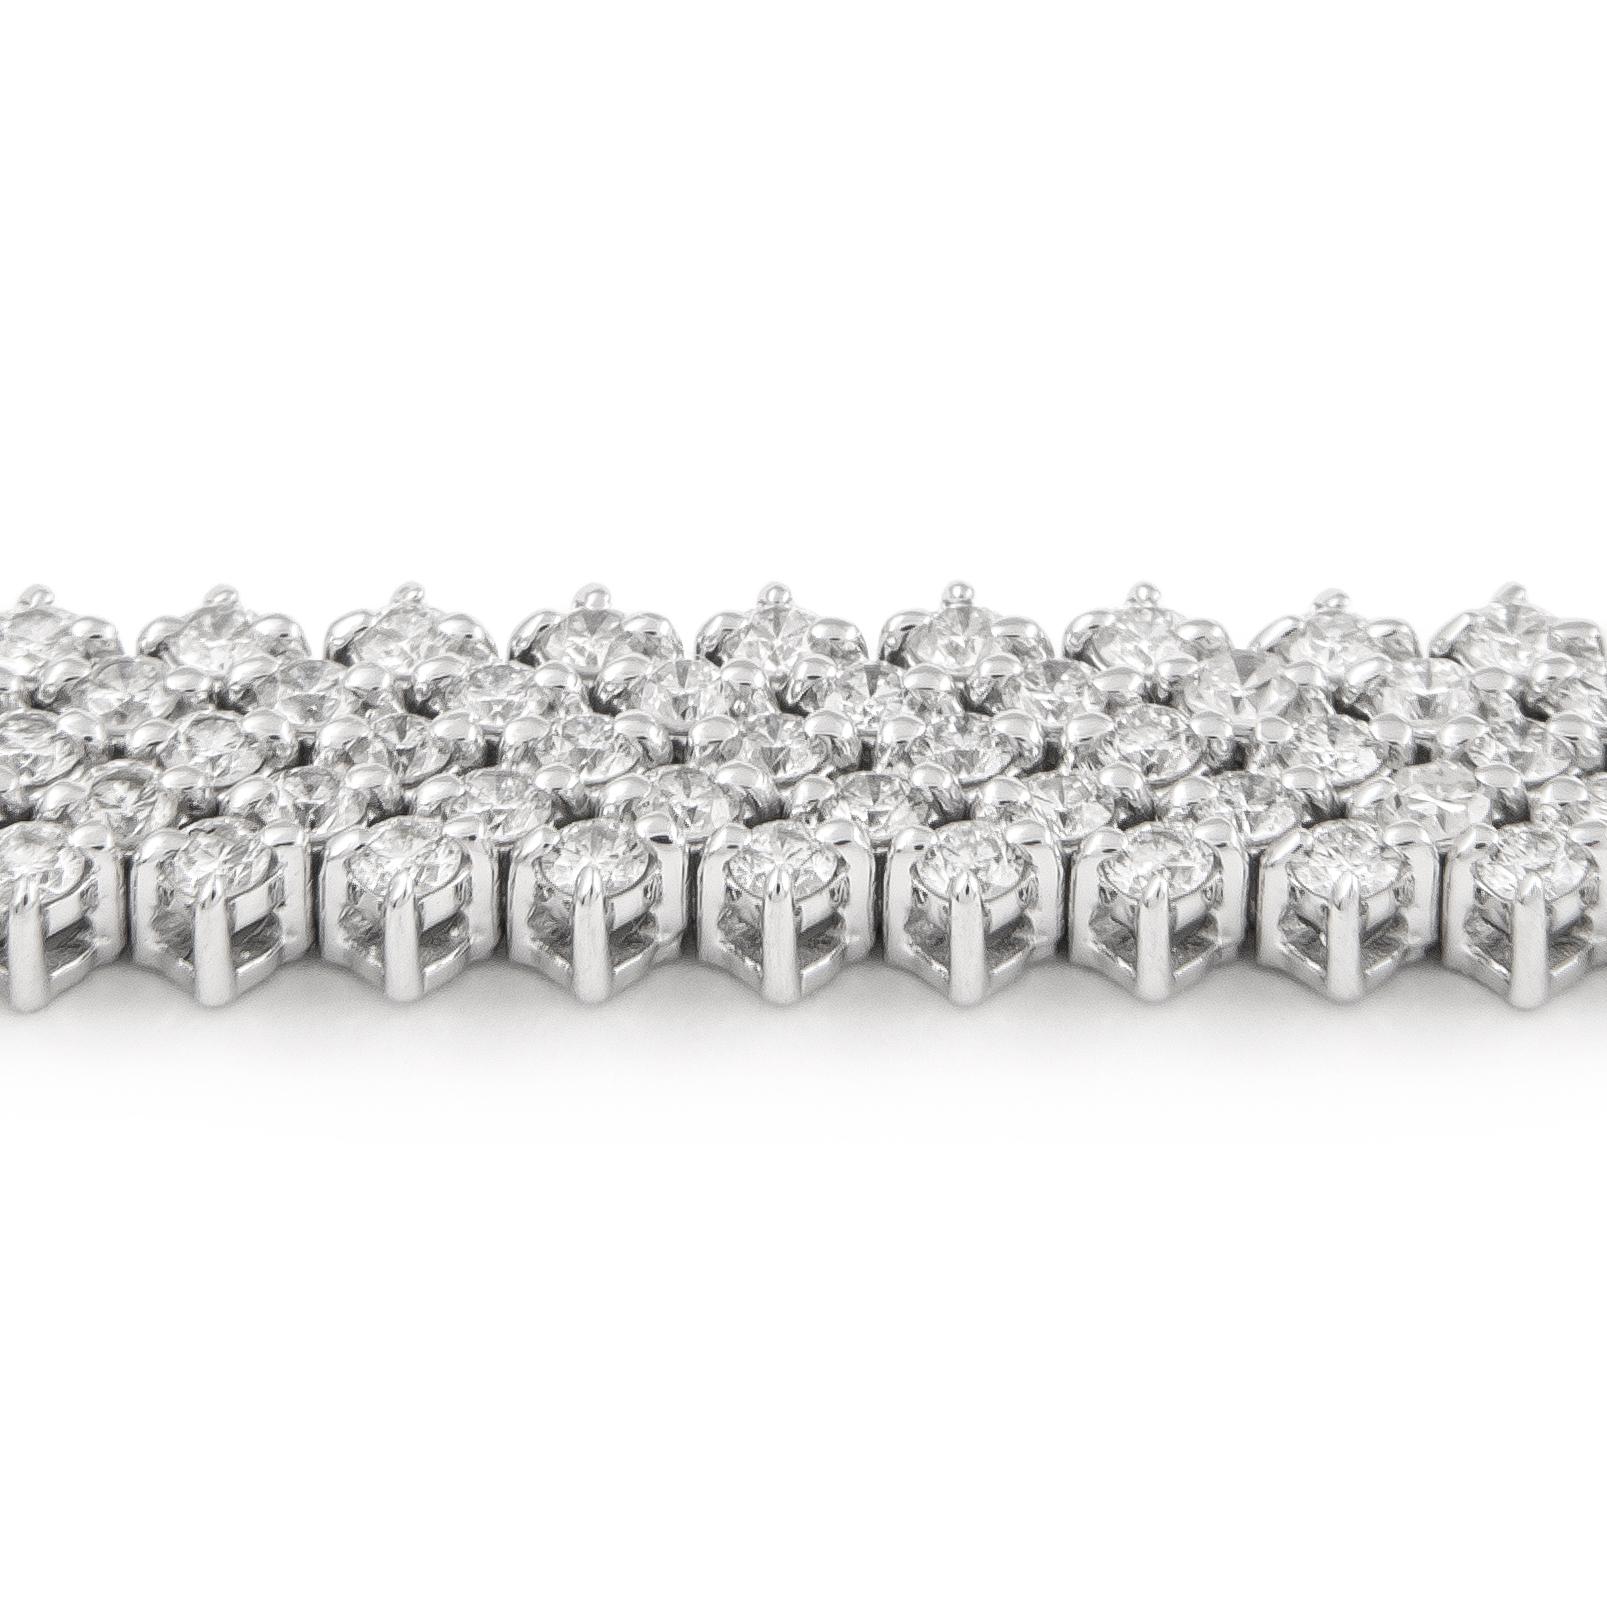 Exquisite and timeless five row diamonds tennis bracelet, by Alexander Beverly Hills.
345 diamonds total, 4.55 carats total. Approximately F/G color and VS2/SI1 clarity. 18.86 grams, 18k white gold, 7 inches. 
Accommodated with an up-to-date